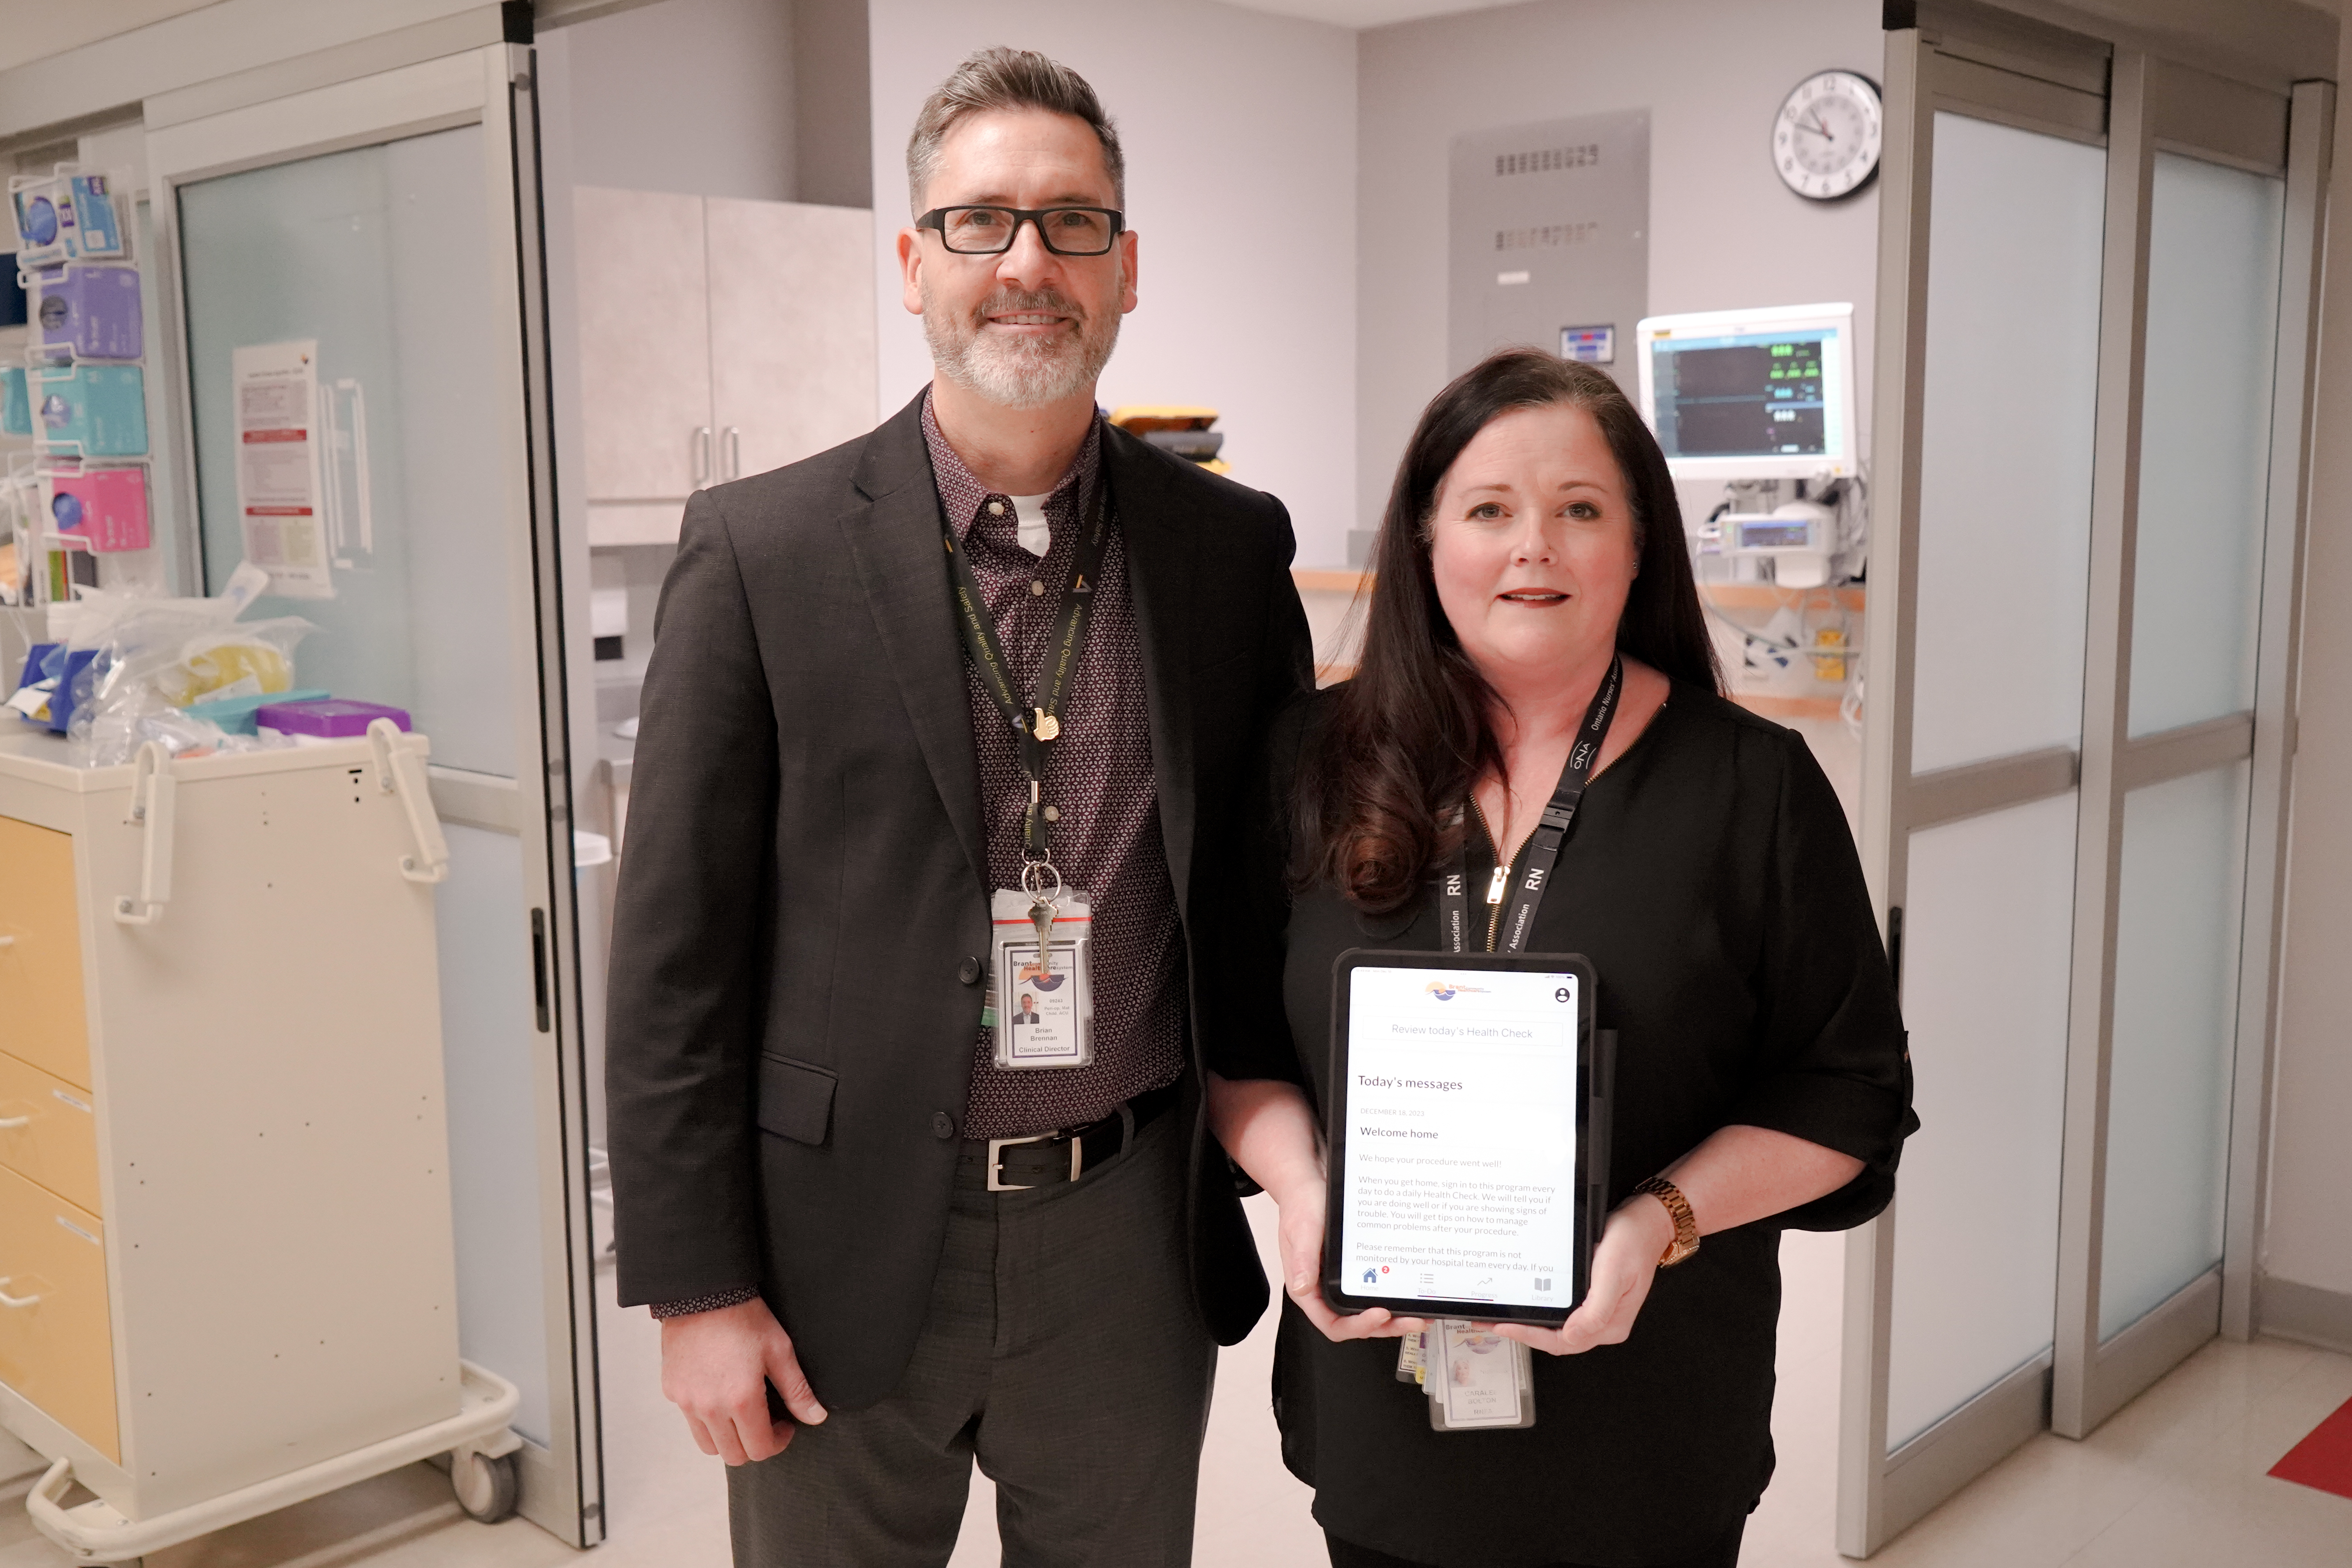 Brian Brennan, clinical director of the peri-operative surgery program, and Caralee Bolton, registered nurse first assistant, at the Brant Community Healthcare System say a virtual companion helps surgery patients recover at home.